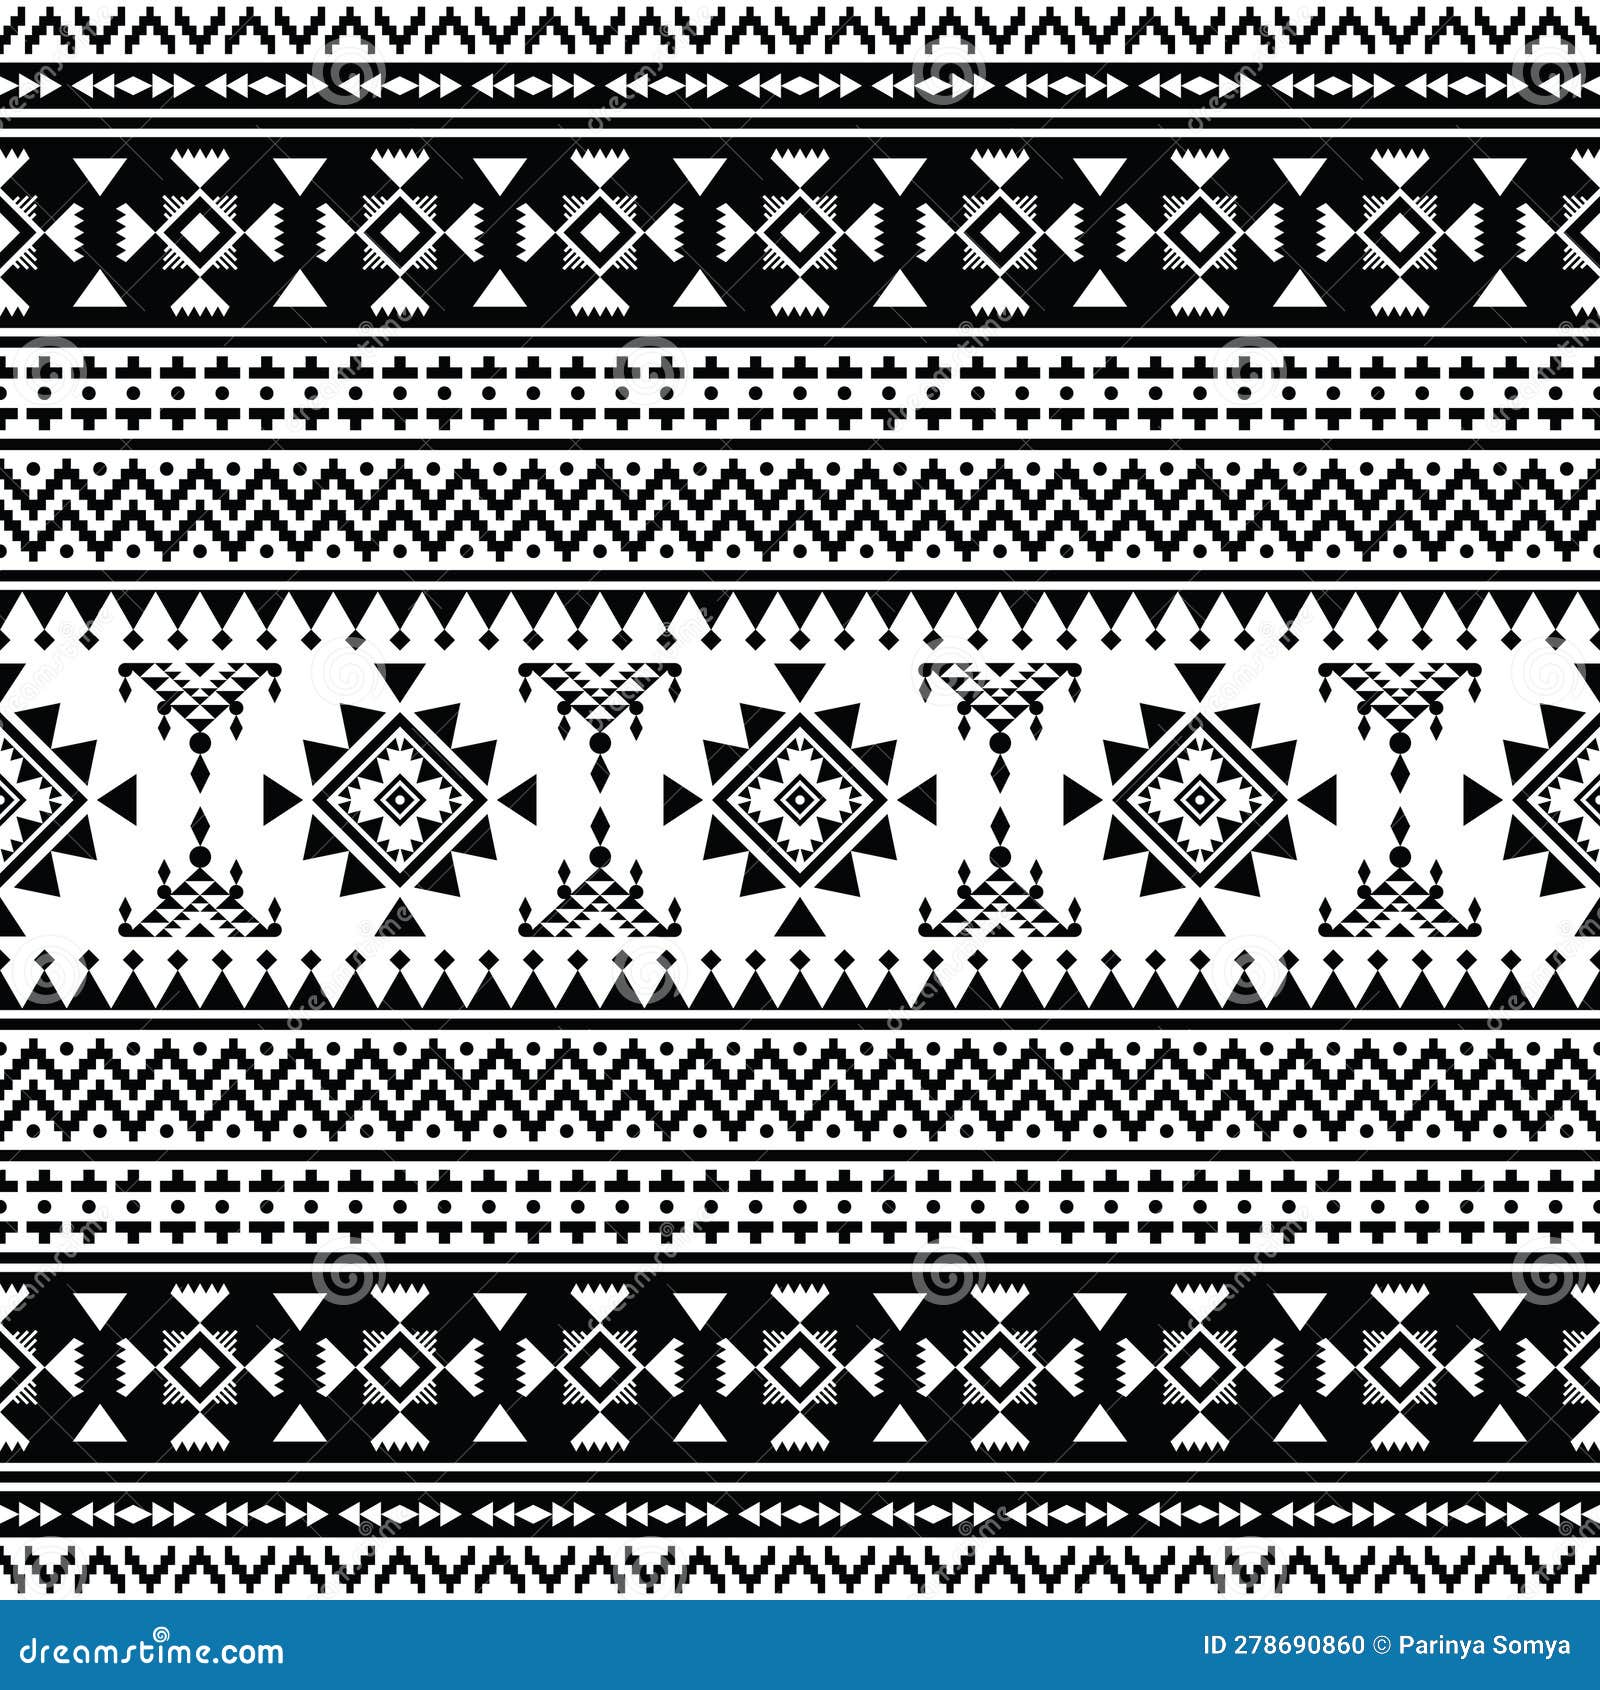 Native American Aztec Ethnic Pattern Design in Black and White. Stock ...